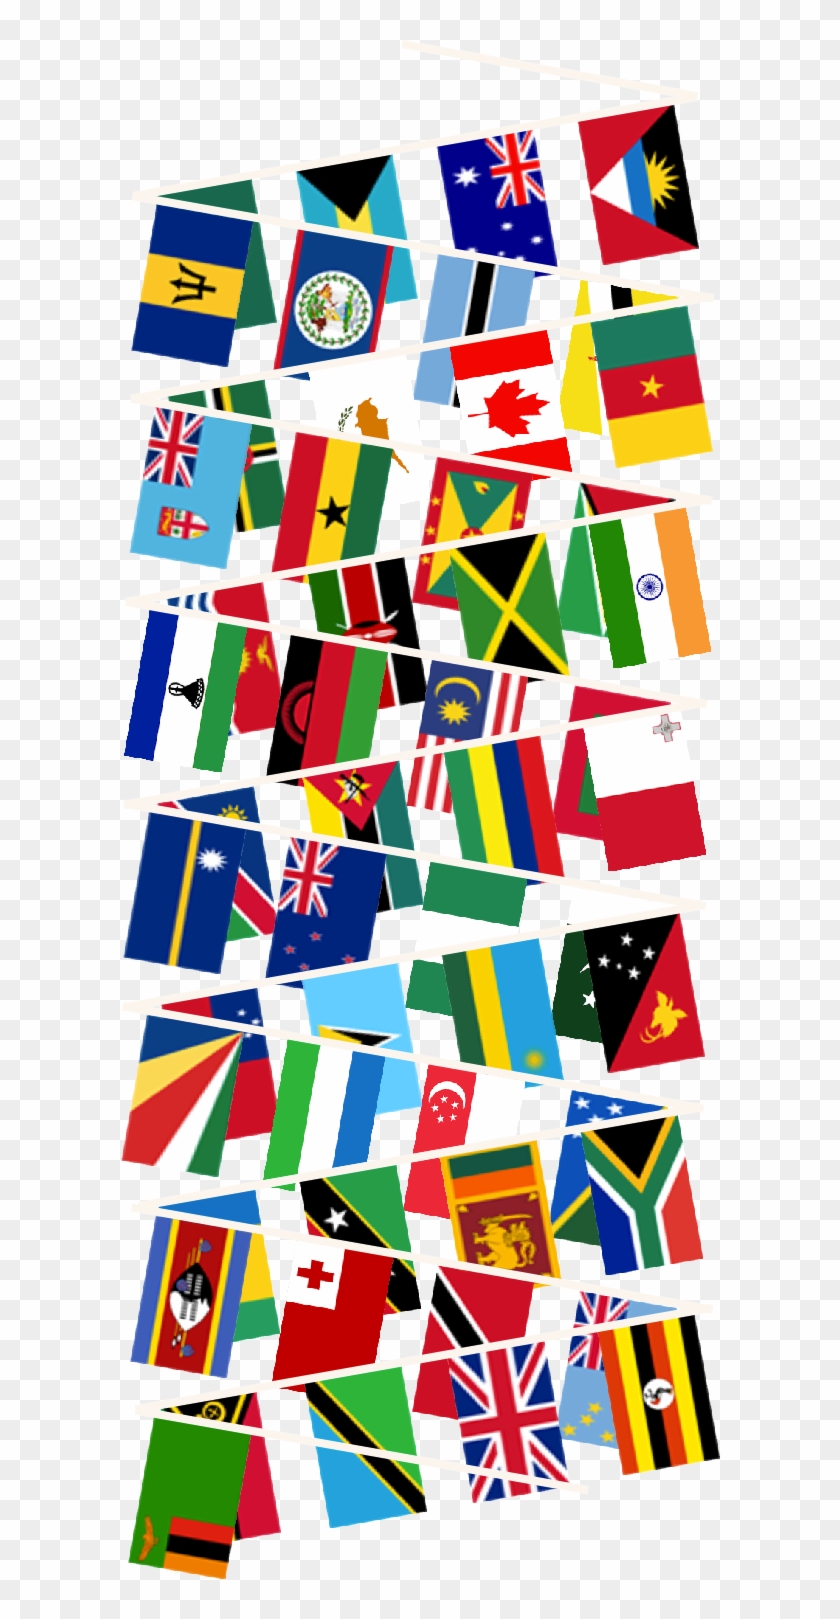 Commonwealth Countries Bunting - Visual Arts Clipart #4253940